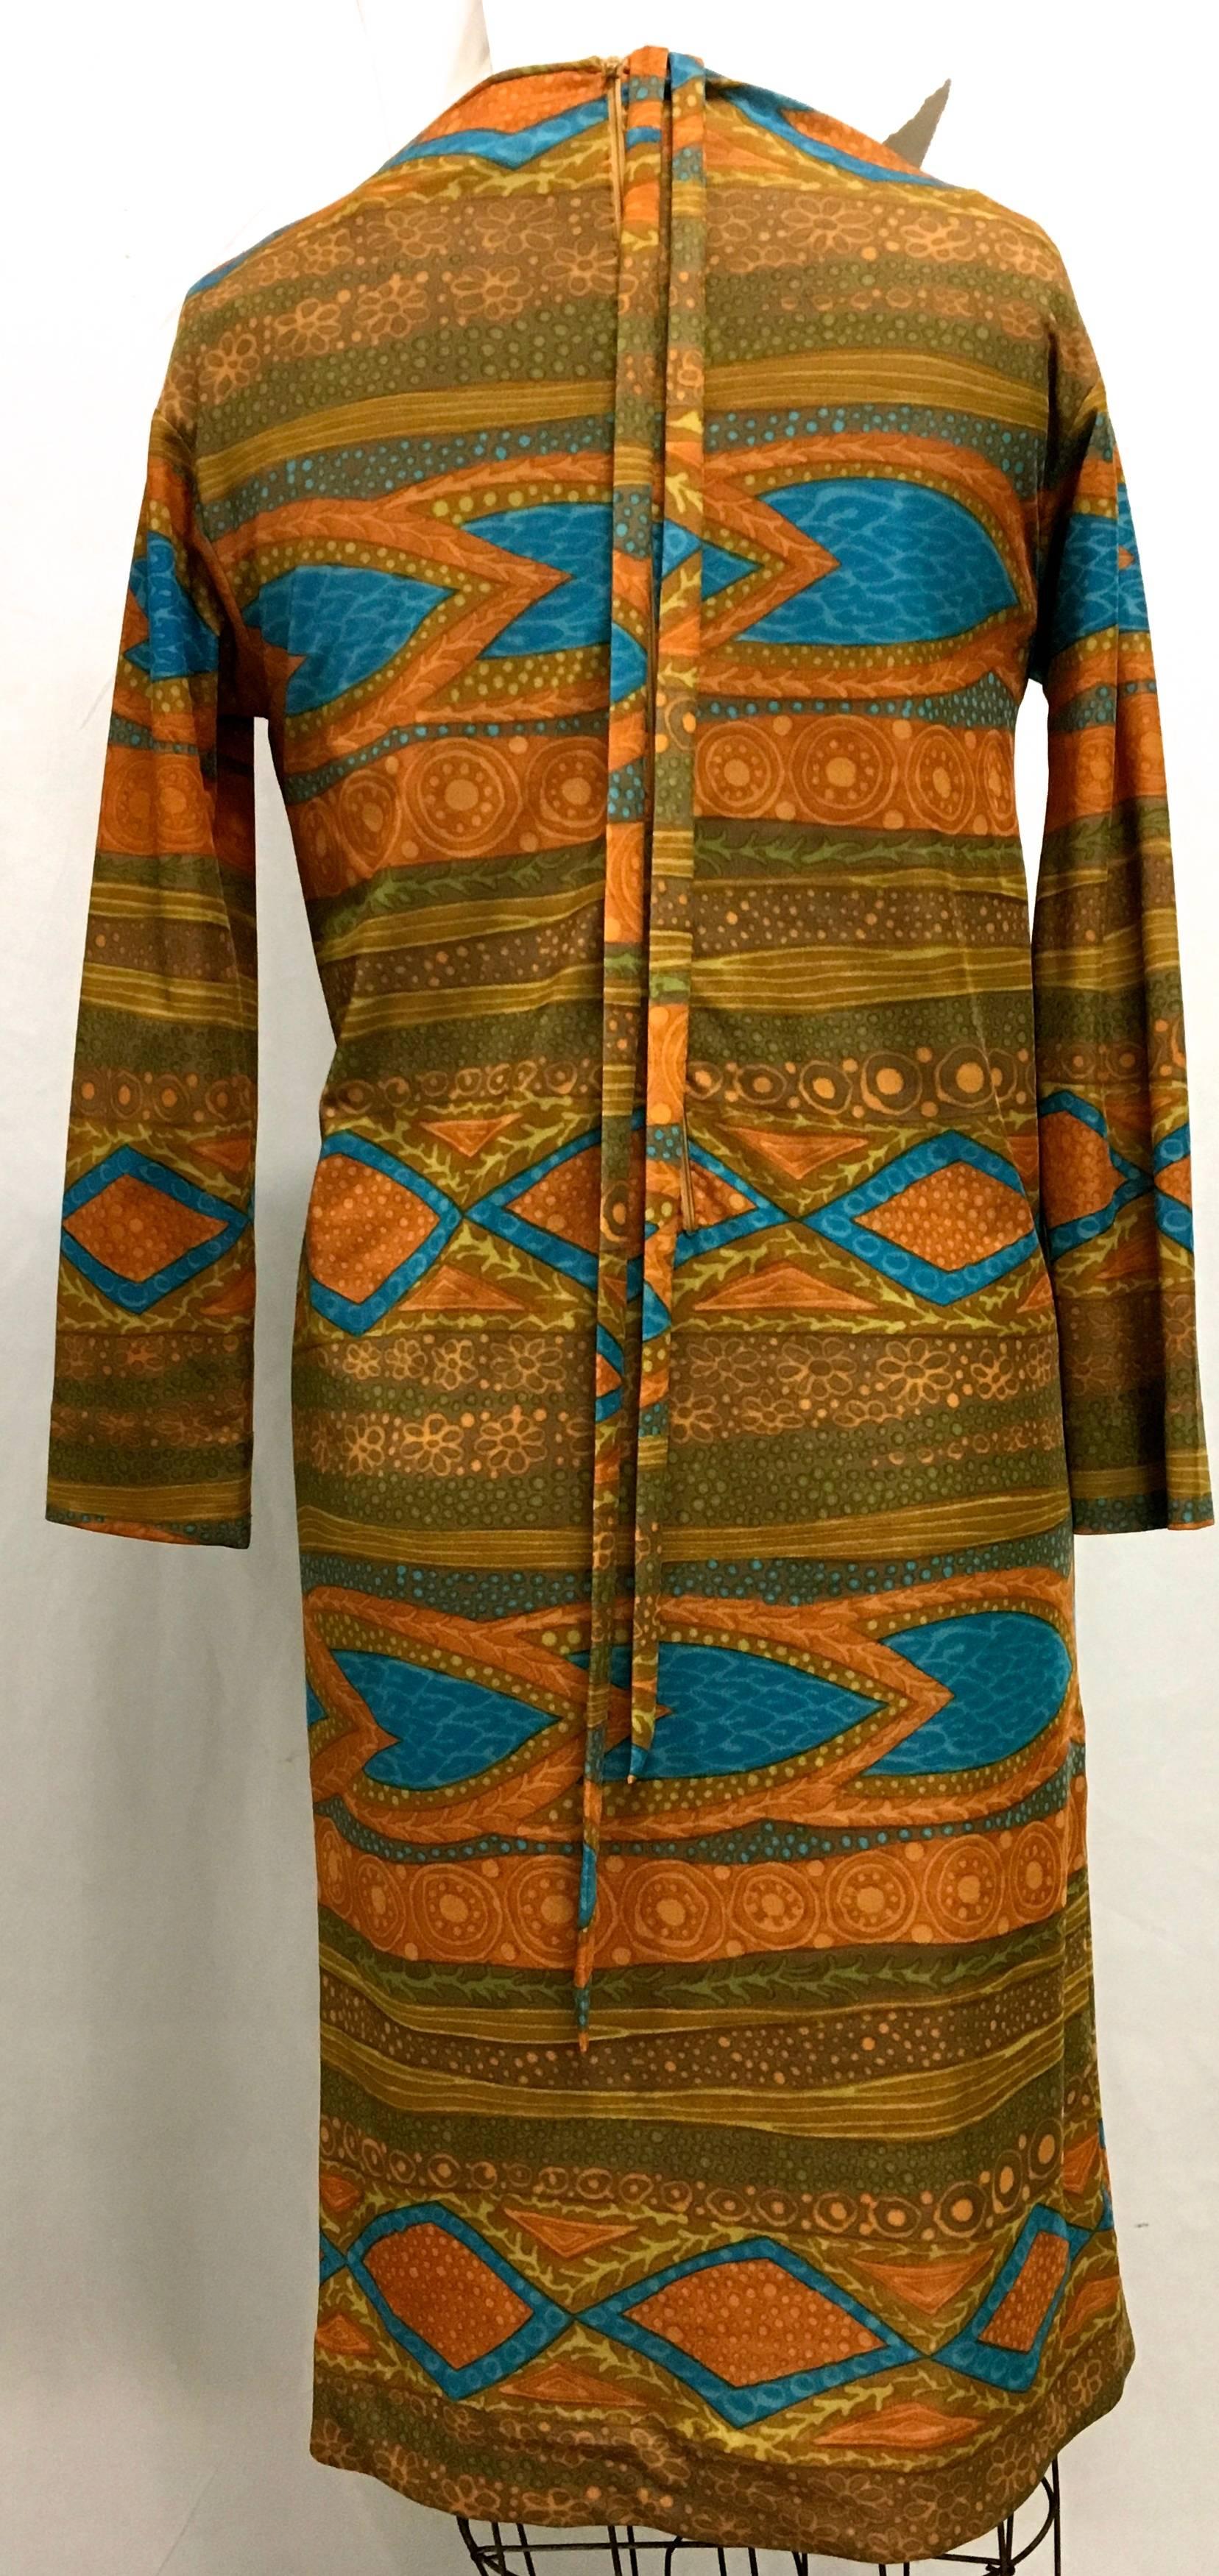 Presented here is a beautiful dress from Goldworm. This vintage dress is from the 1960's and is in near perfect condition. The dress is a design comprised of colors of blue, gold, orange, green and brown in varying shades throughout. The dress has a